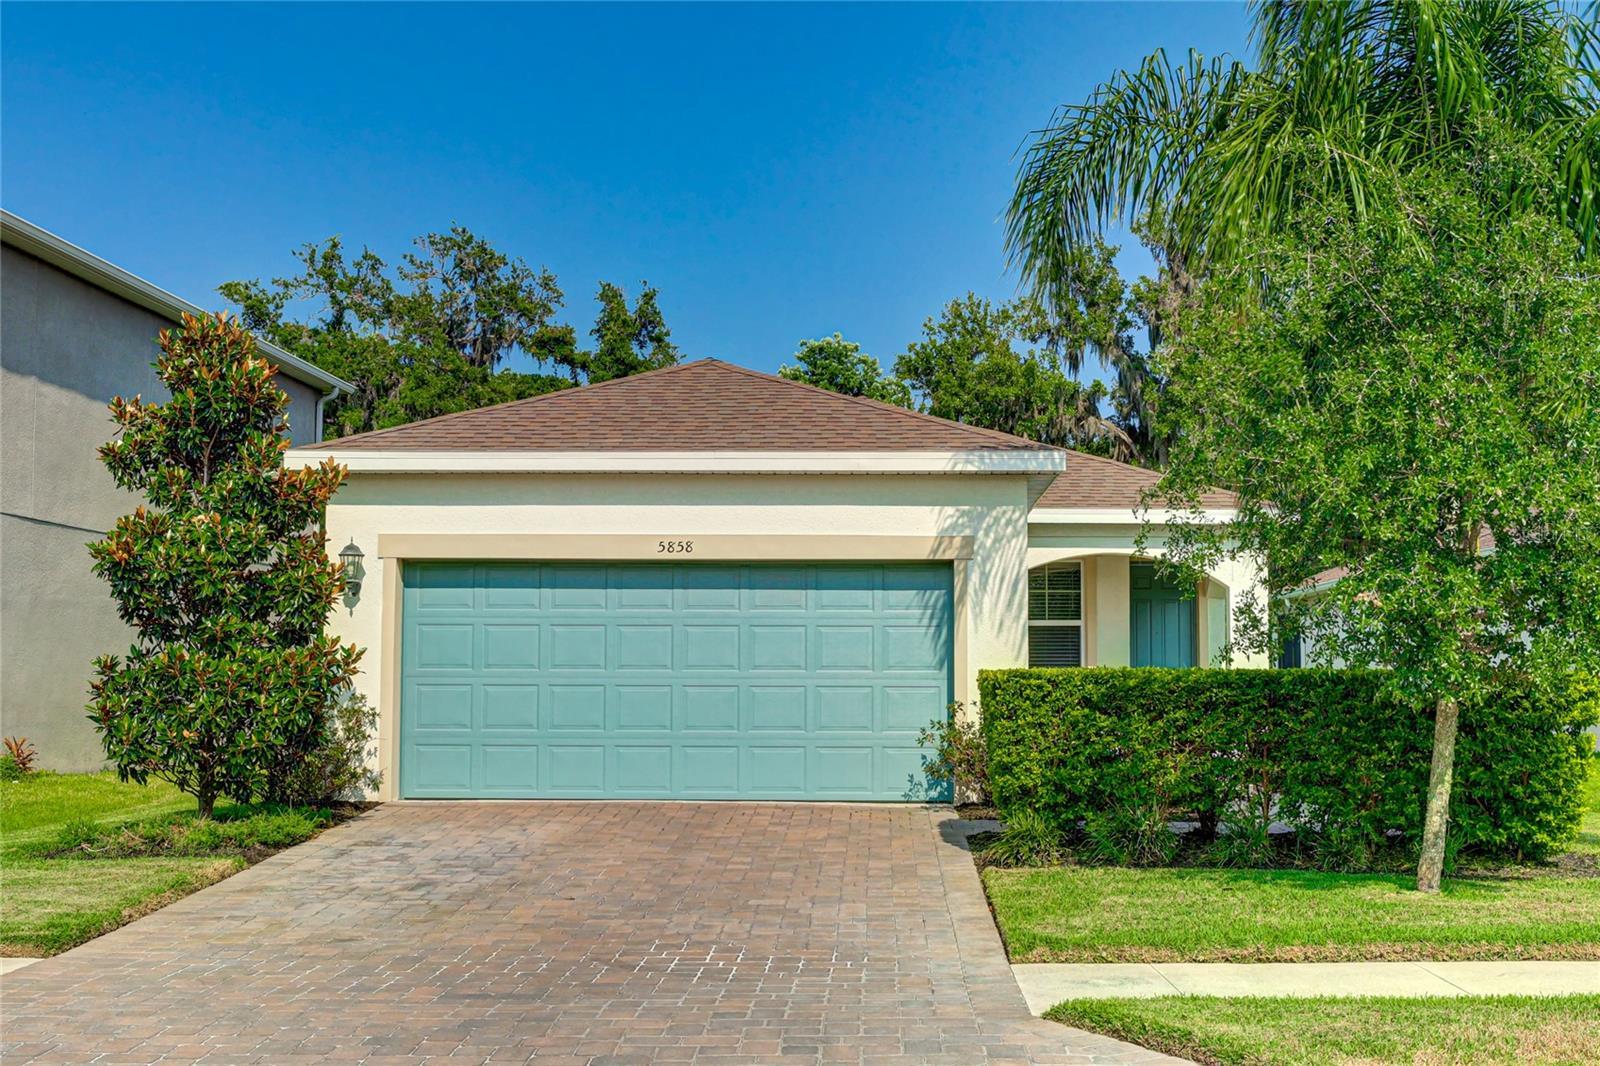 5858 BUNGALOW GROVE, PALMETTO, Single Family Residence,  for sale, The Mount Dora Group 